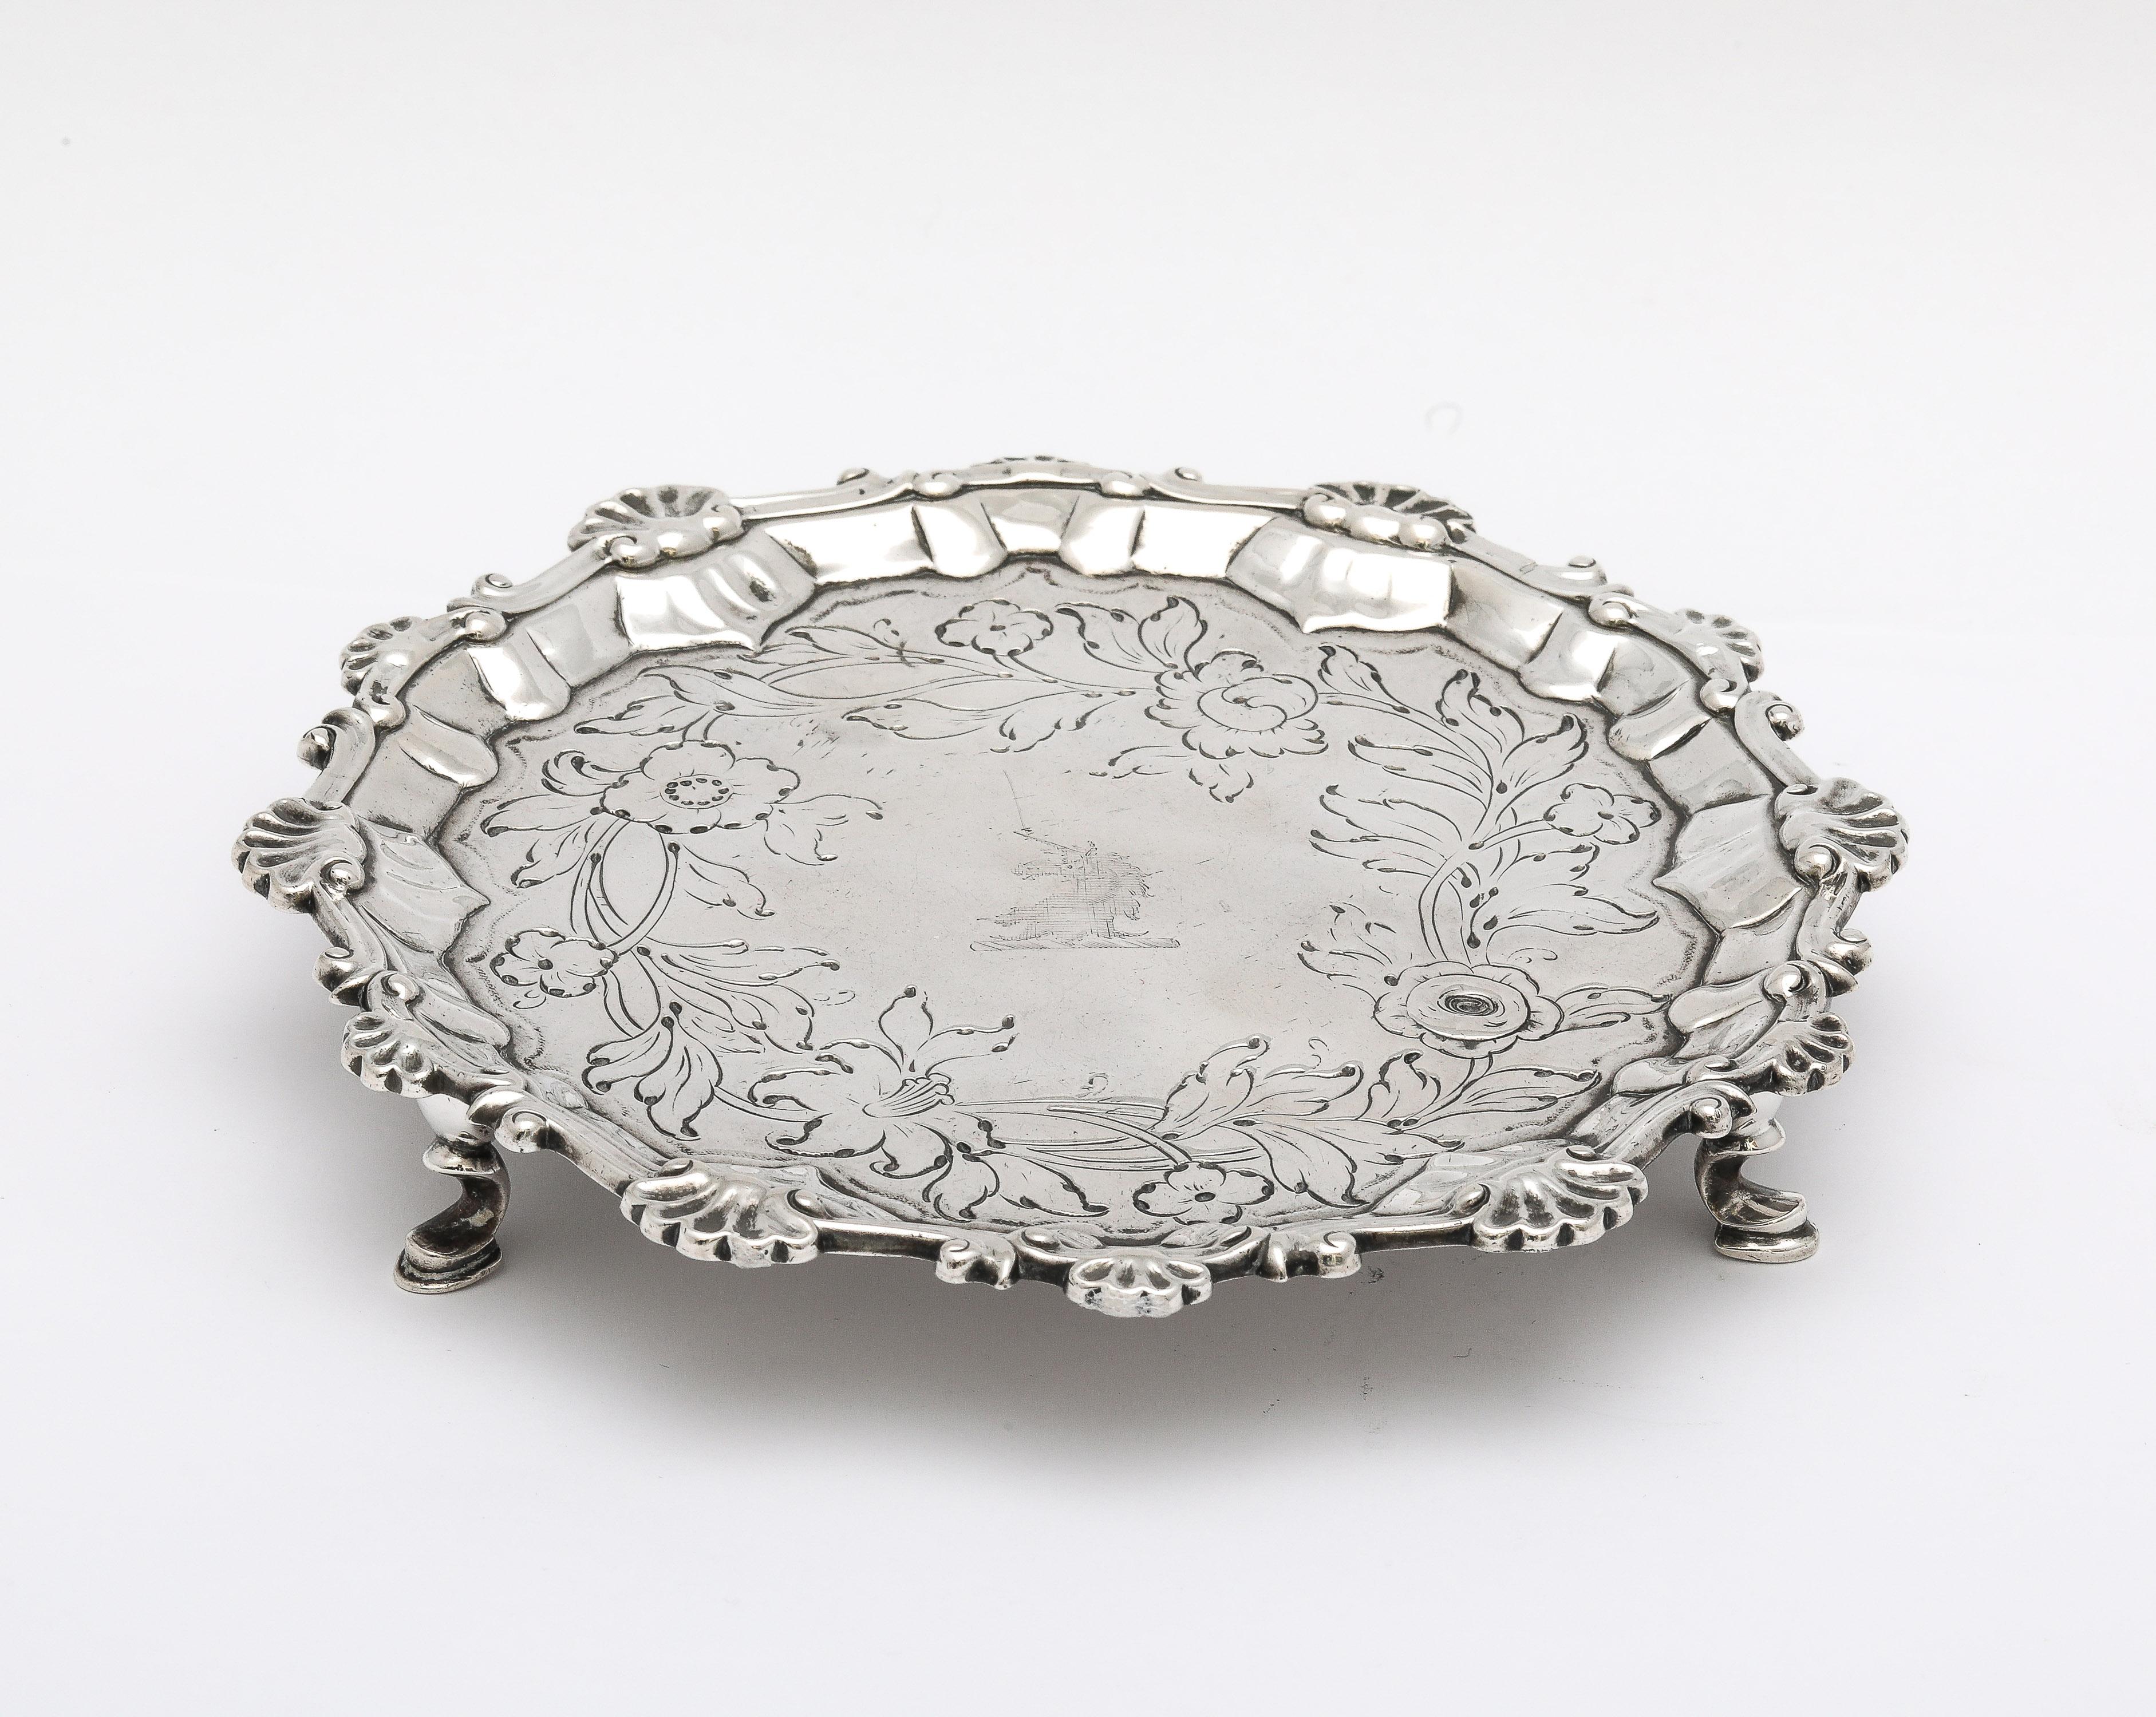 George III Period, hoof-footed sterling silver salver/tray, London, year-hallmarked for 1764, Richard Rugg - maker. The salver is designed with a scroll and shell border, and has a lovely, etched floral design which surrounds a central armorial of a